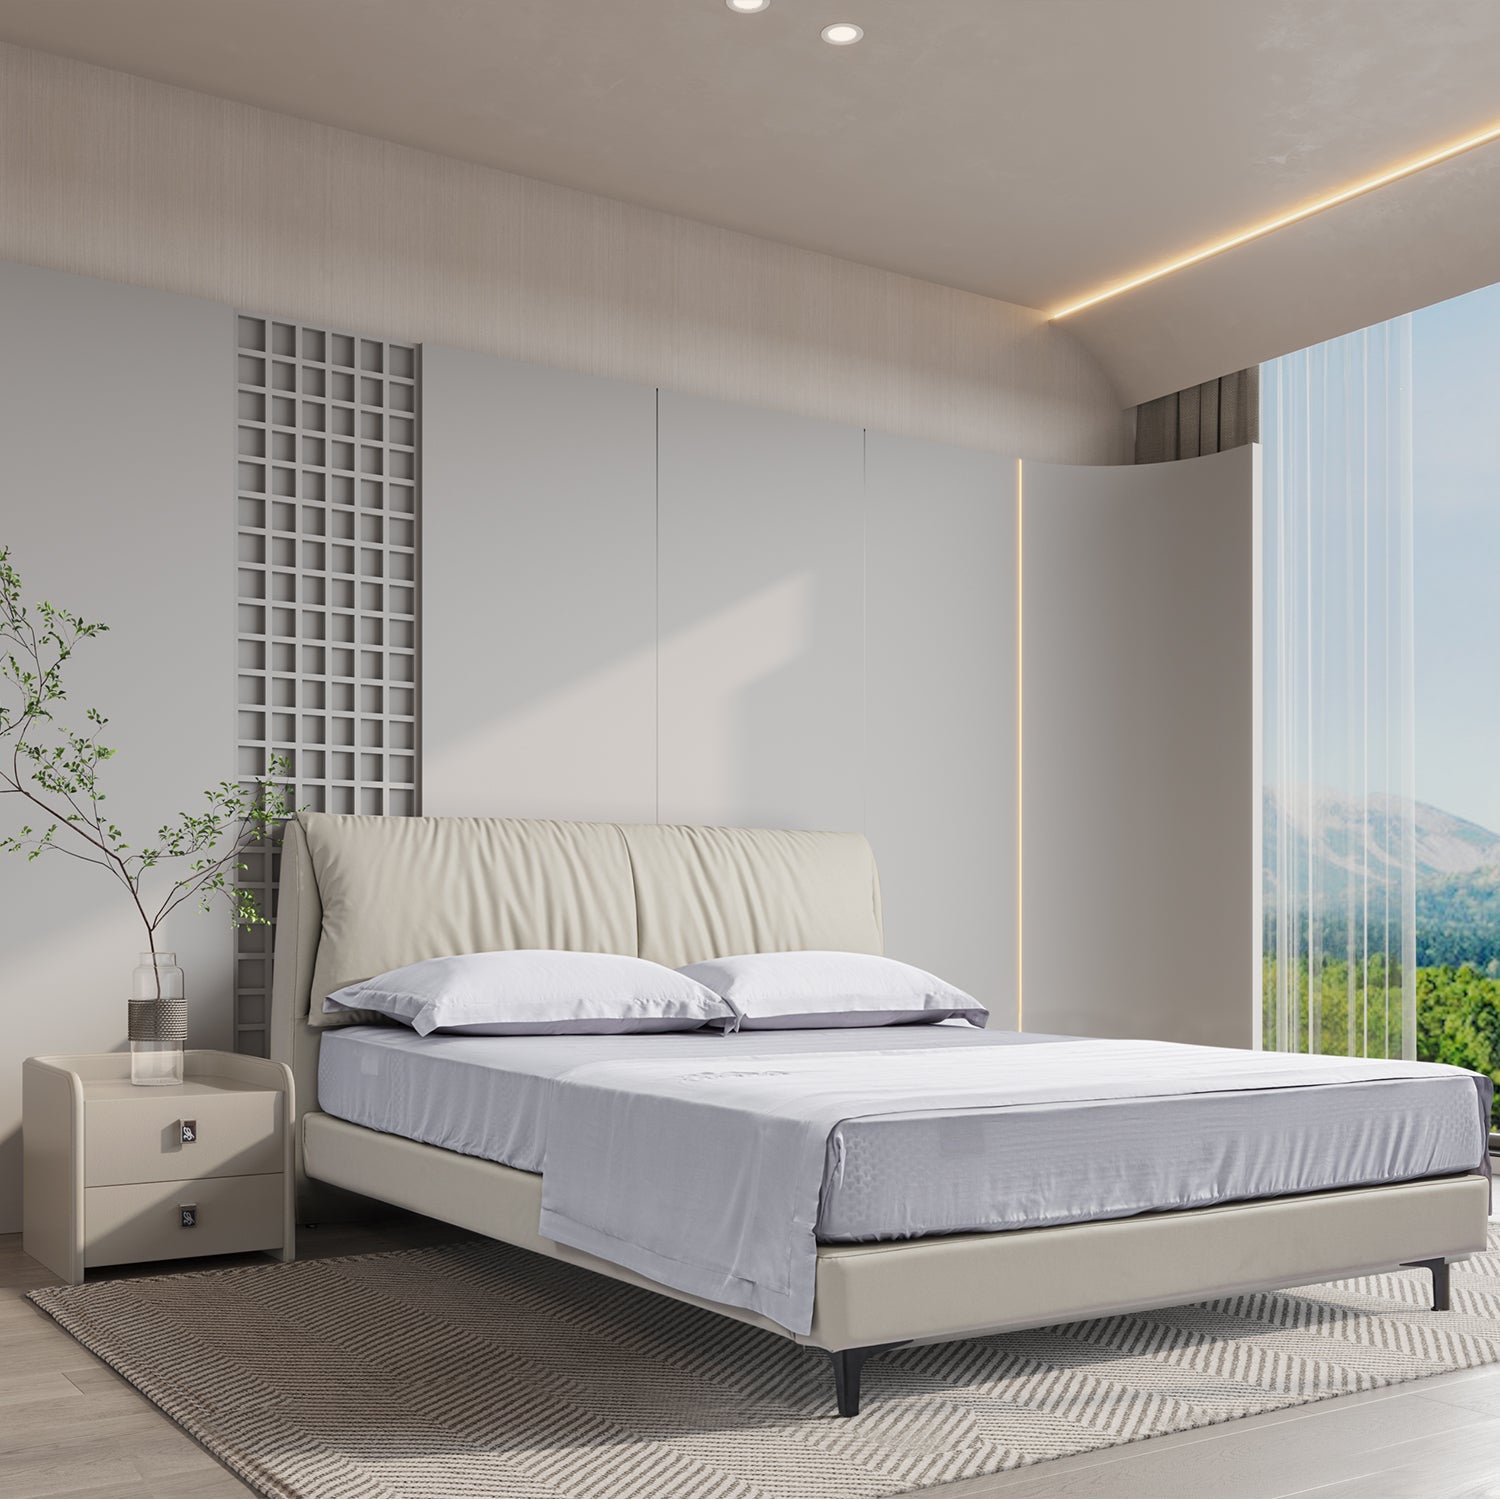 DeRUCCI Bed Frame BOC1 - 012 in a modern bedroom with cream-colored leather frame, white bedding, and a nightstand with a potted plant. Minimalist design with a large window offering a scenic view.